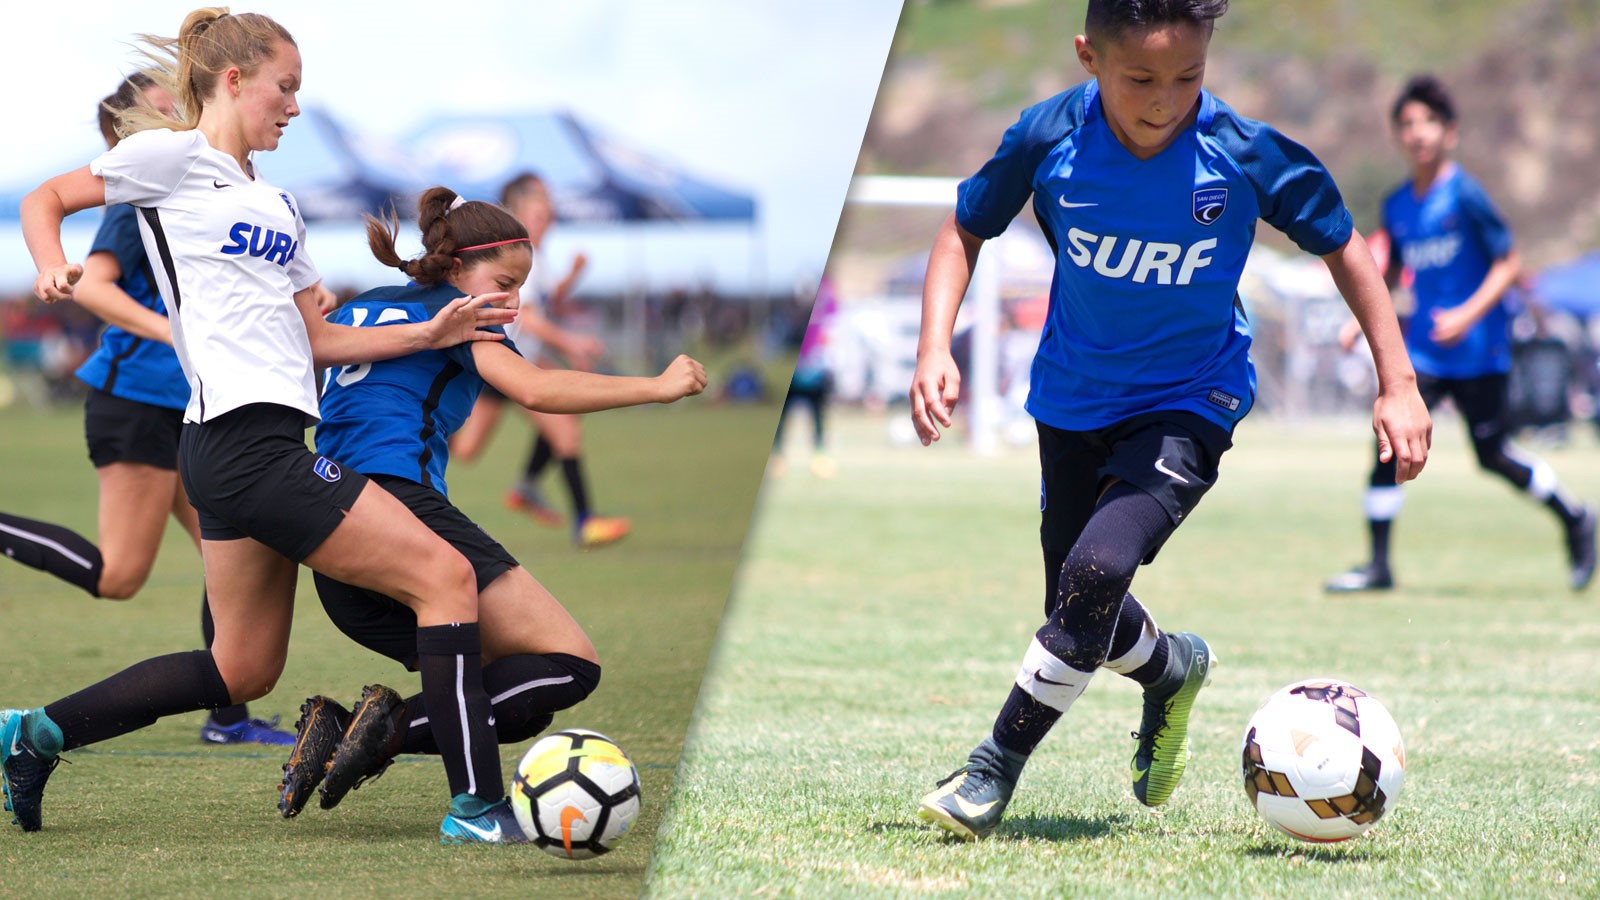 Surf Cup Sports Said to Have 120M Economic Impact San Diego Business